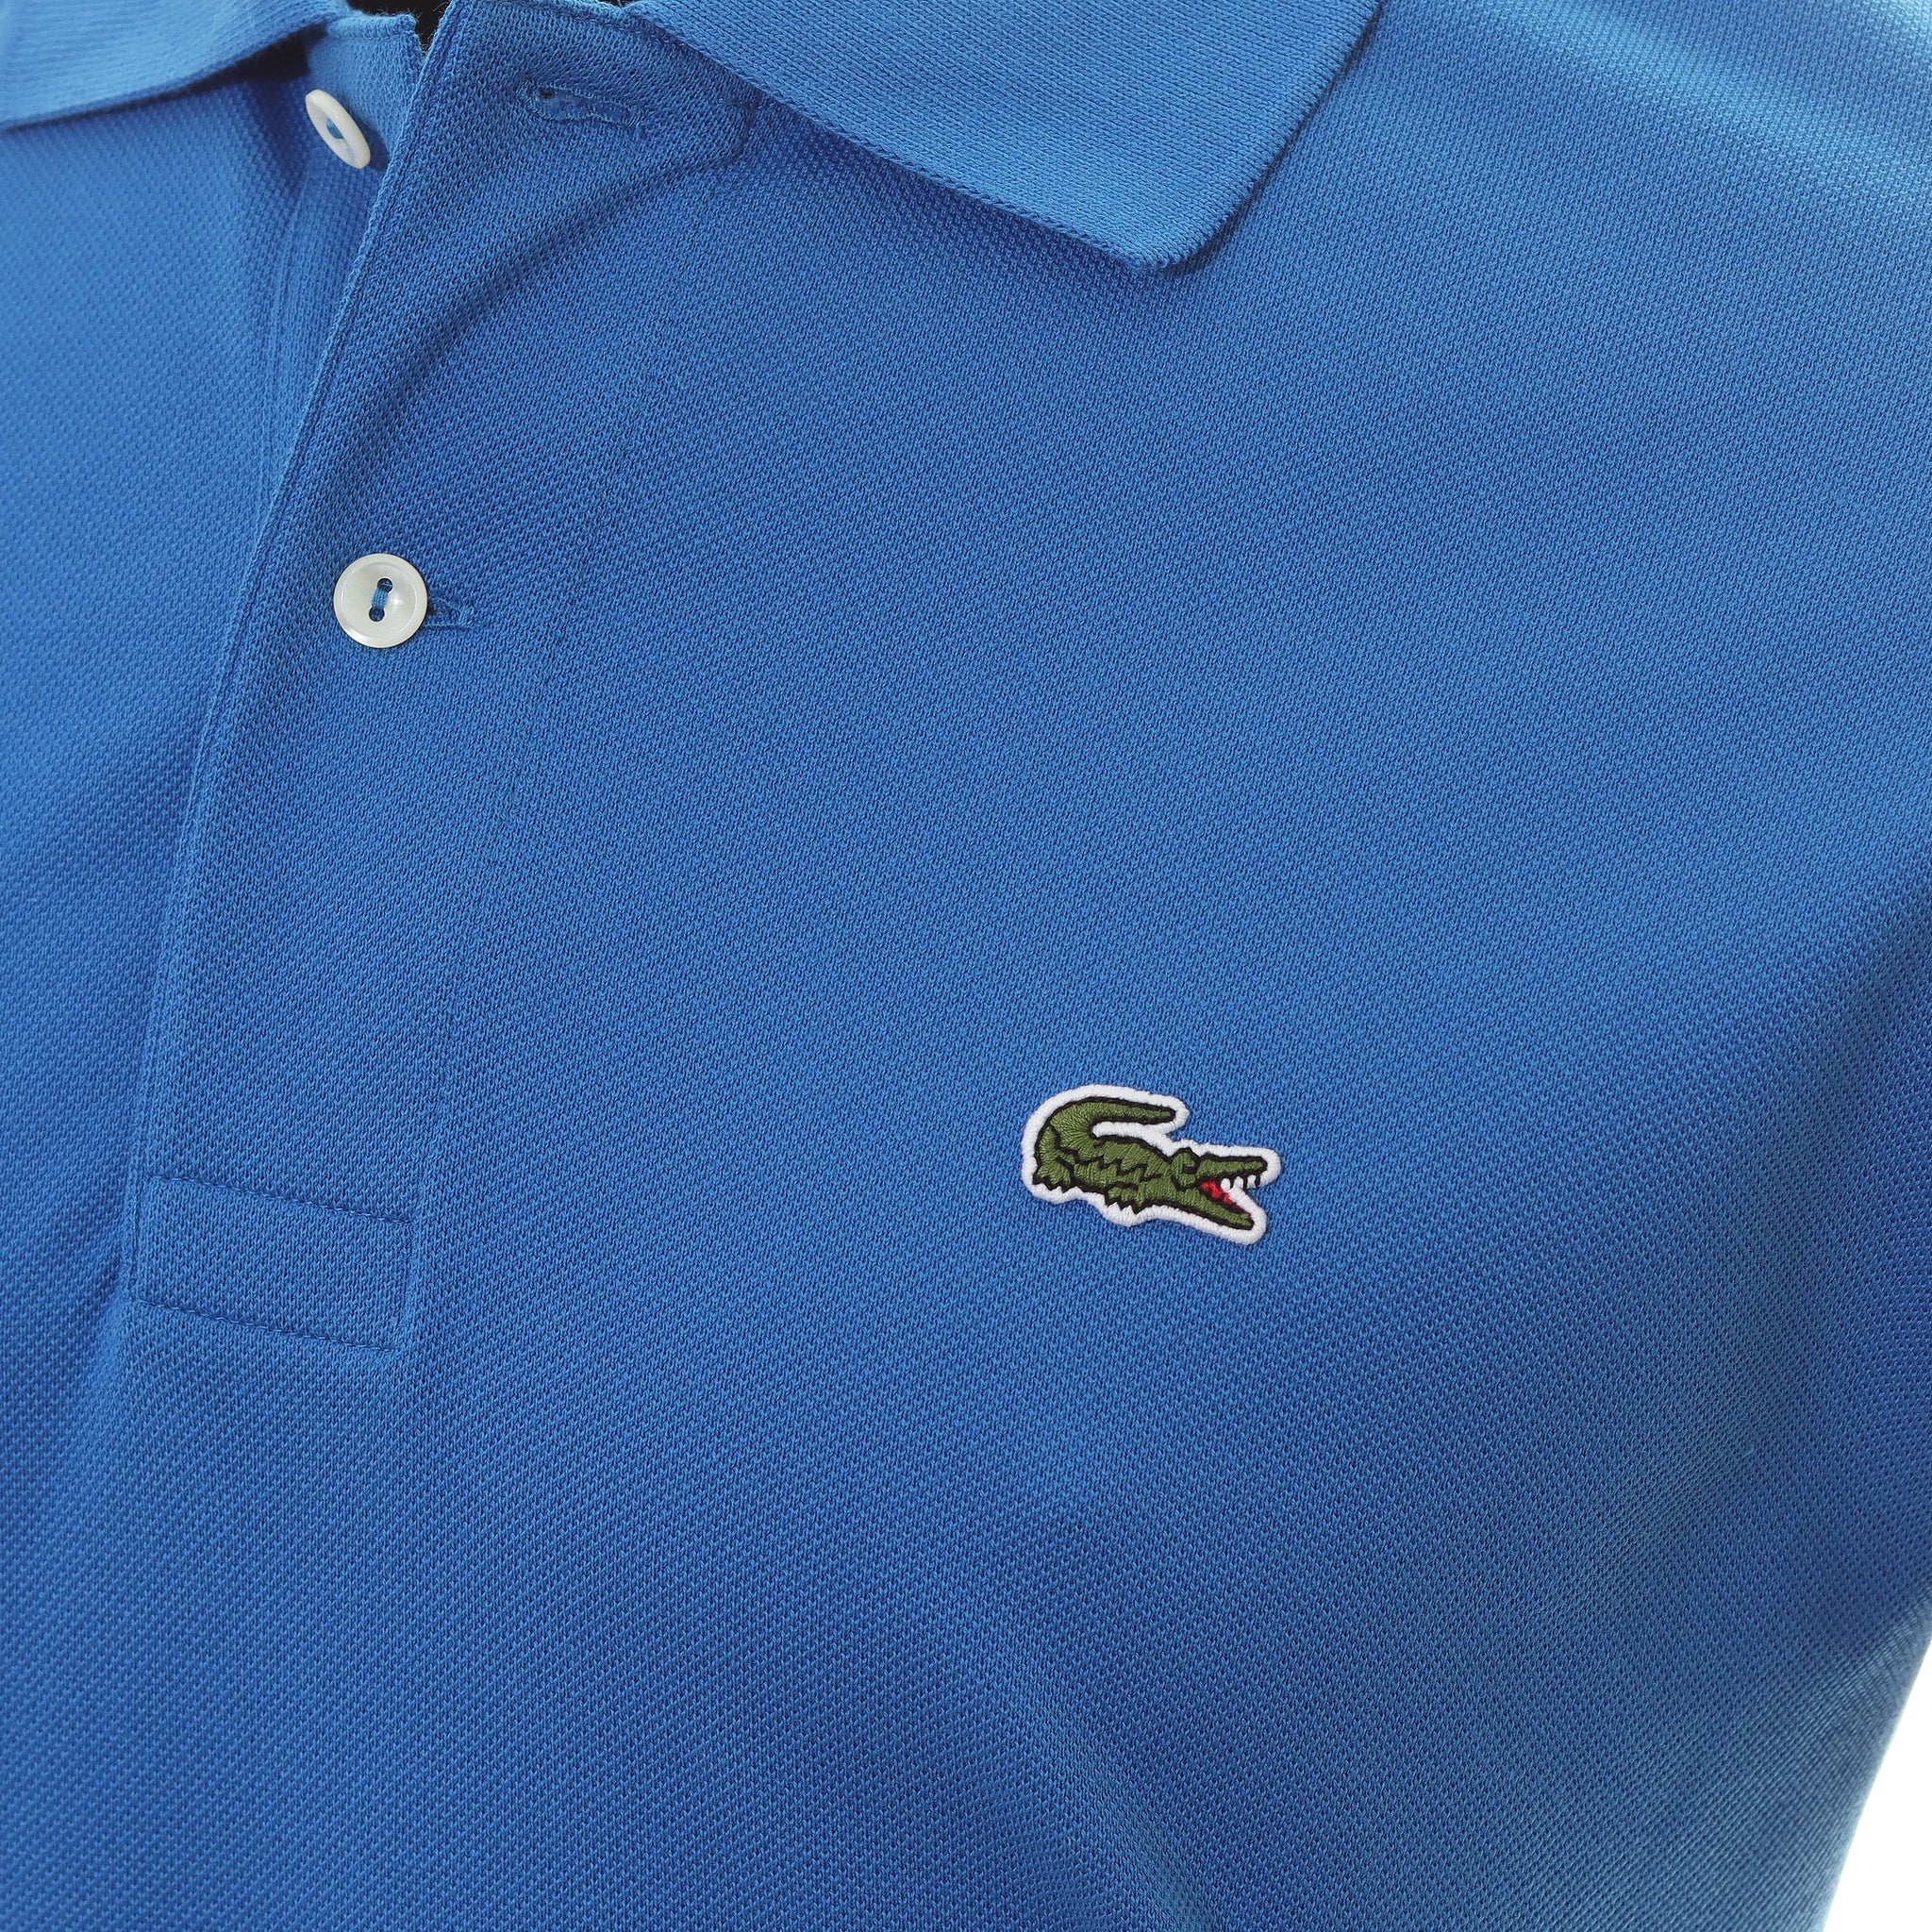 Lacoste Classic Pique Polo Shirt L1212 Blue SIY | Function18 | Restrictedgs